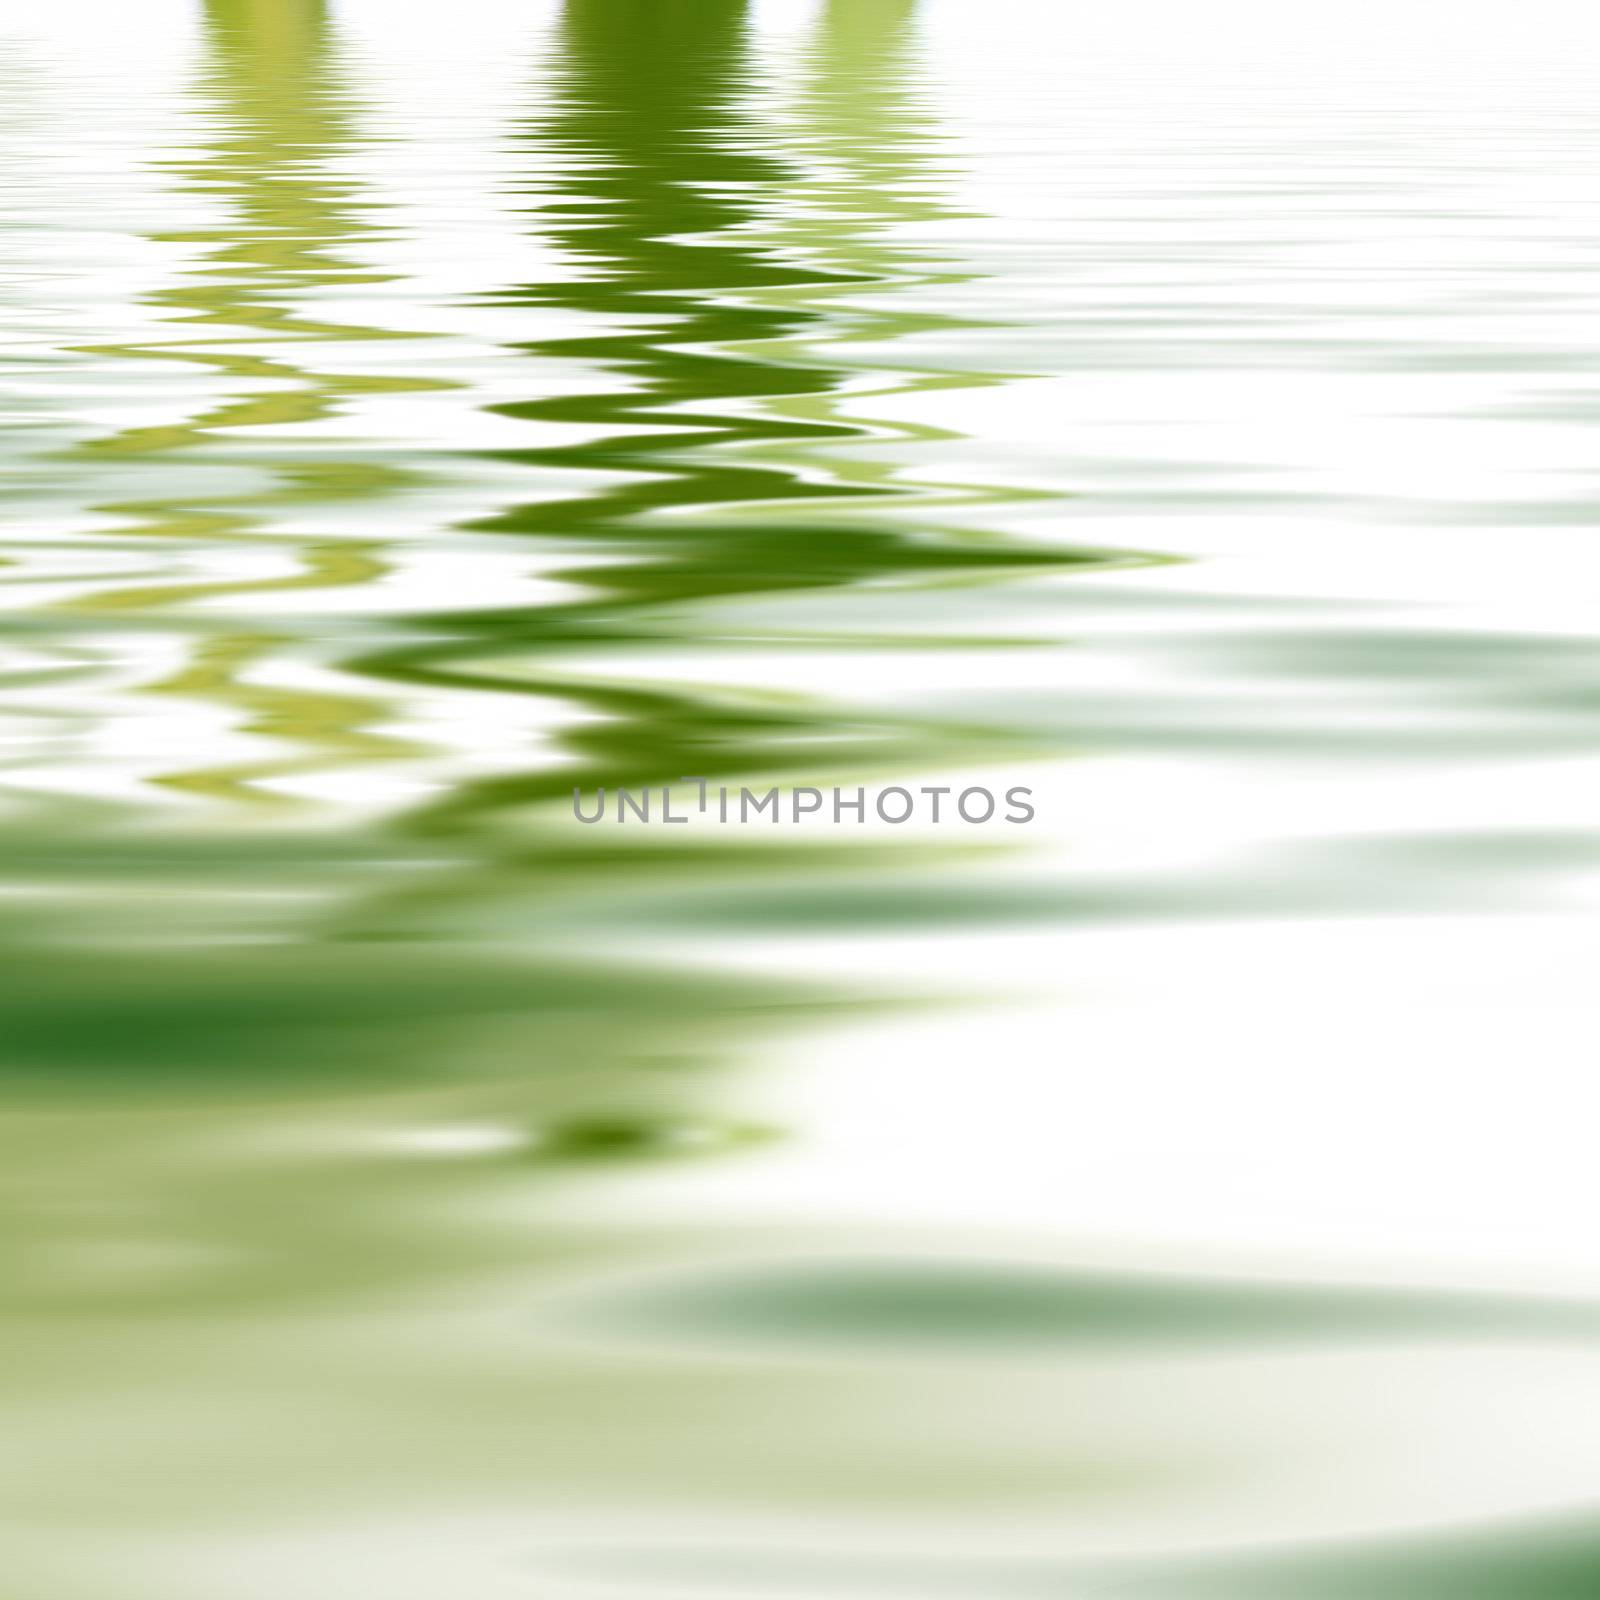 Reflection of greenery mirrored on the surface of calm rippled water for a background of tranquillity and wellbeing